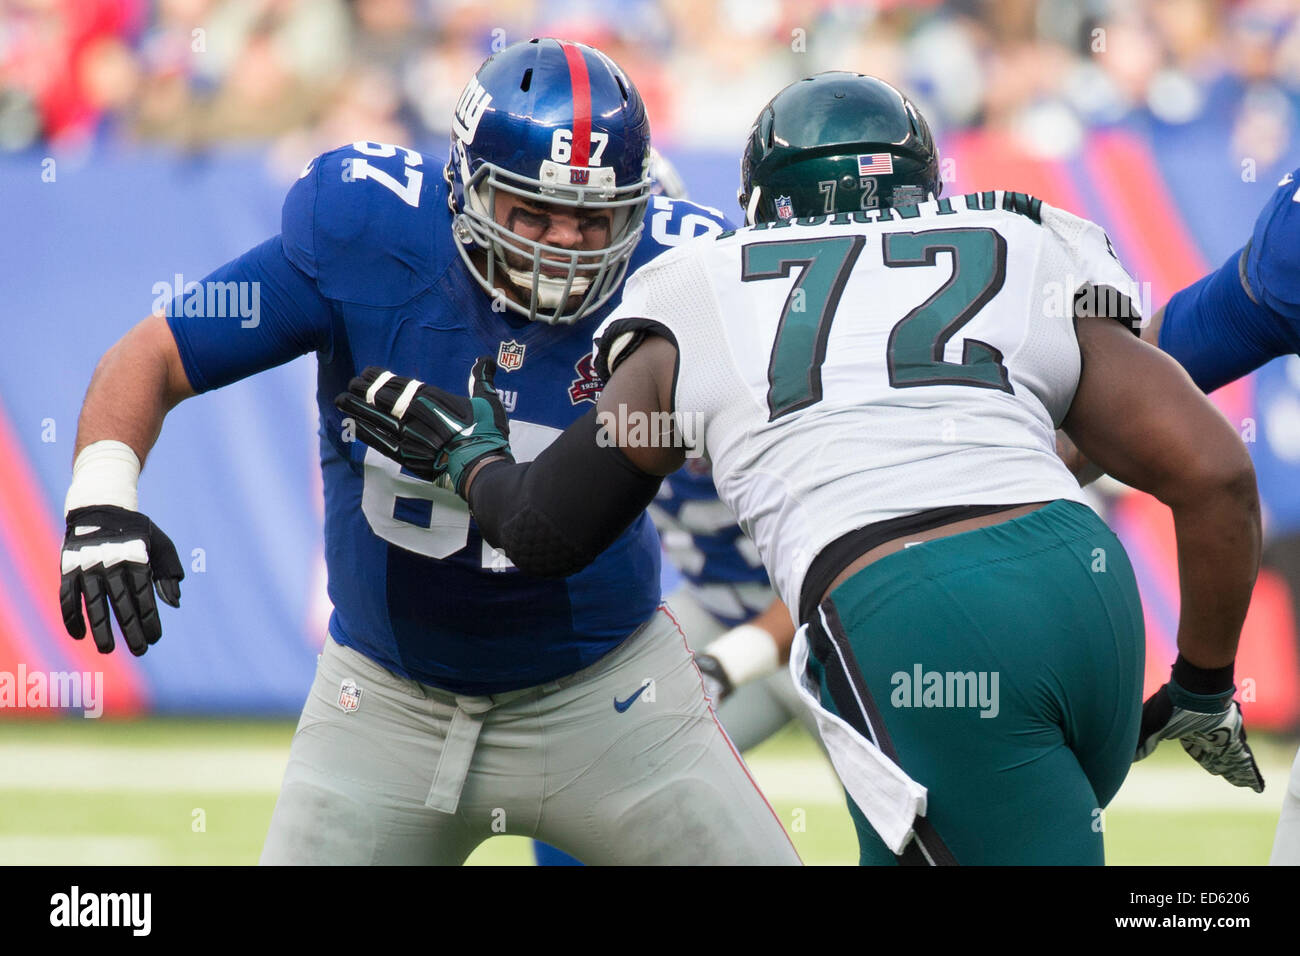 East Rutherford, New Jersey, USA. 28th December, 2014. New York Giants tackle Justin Pugh (67) in action against Philadelphia Eagles defensive end Cedric Thornton (72) during the NFL game between the Philadelphia Eagles and the New York Giants at MetLife Stadium in East Rutherford, New Jersey. The Philadelphia Eagles won 34-26. Credit:  Cal Sport Media/Alamy Live News Stock Photo